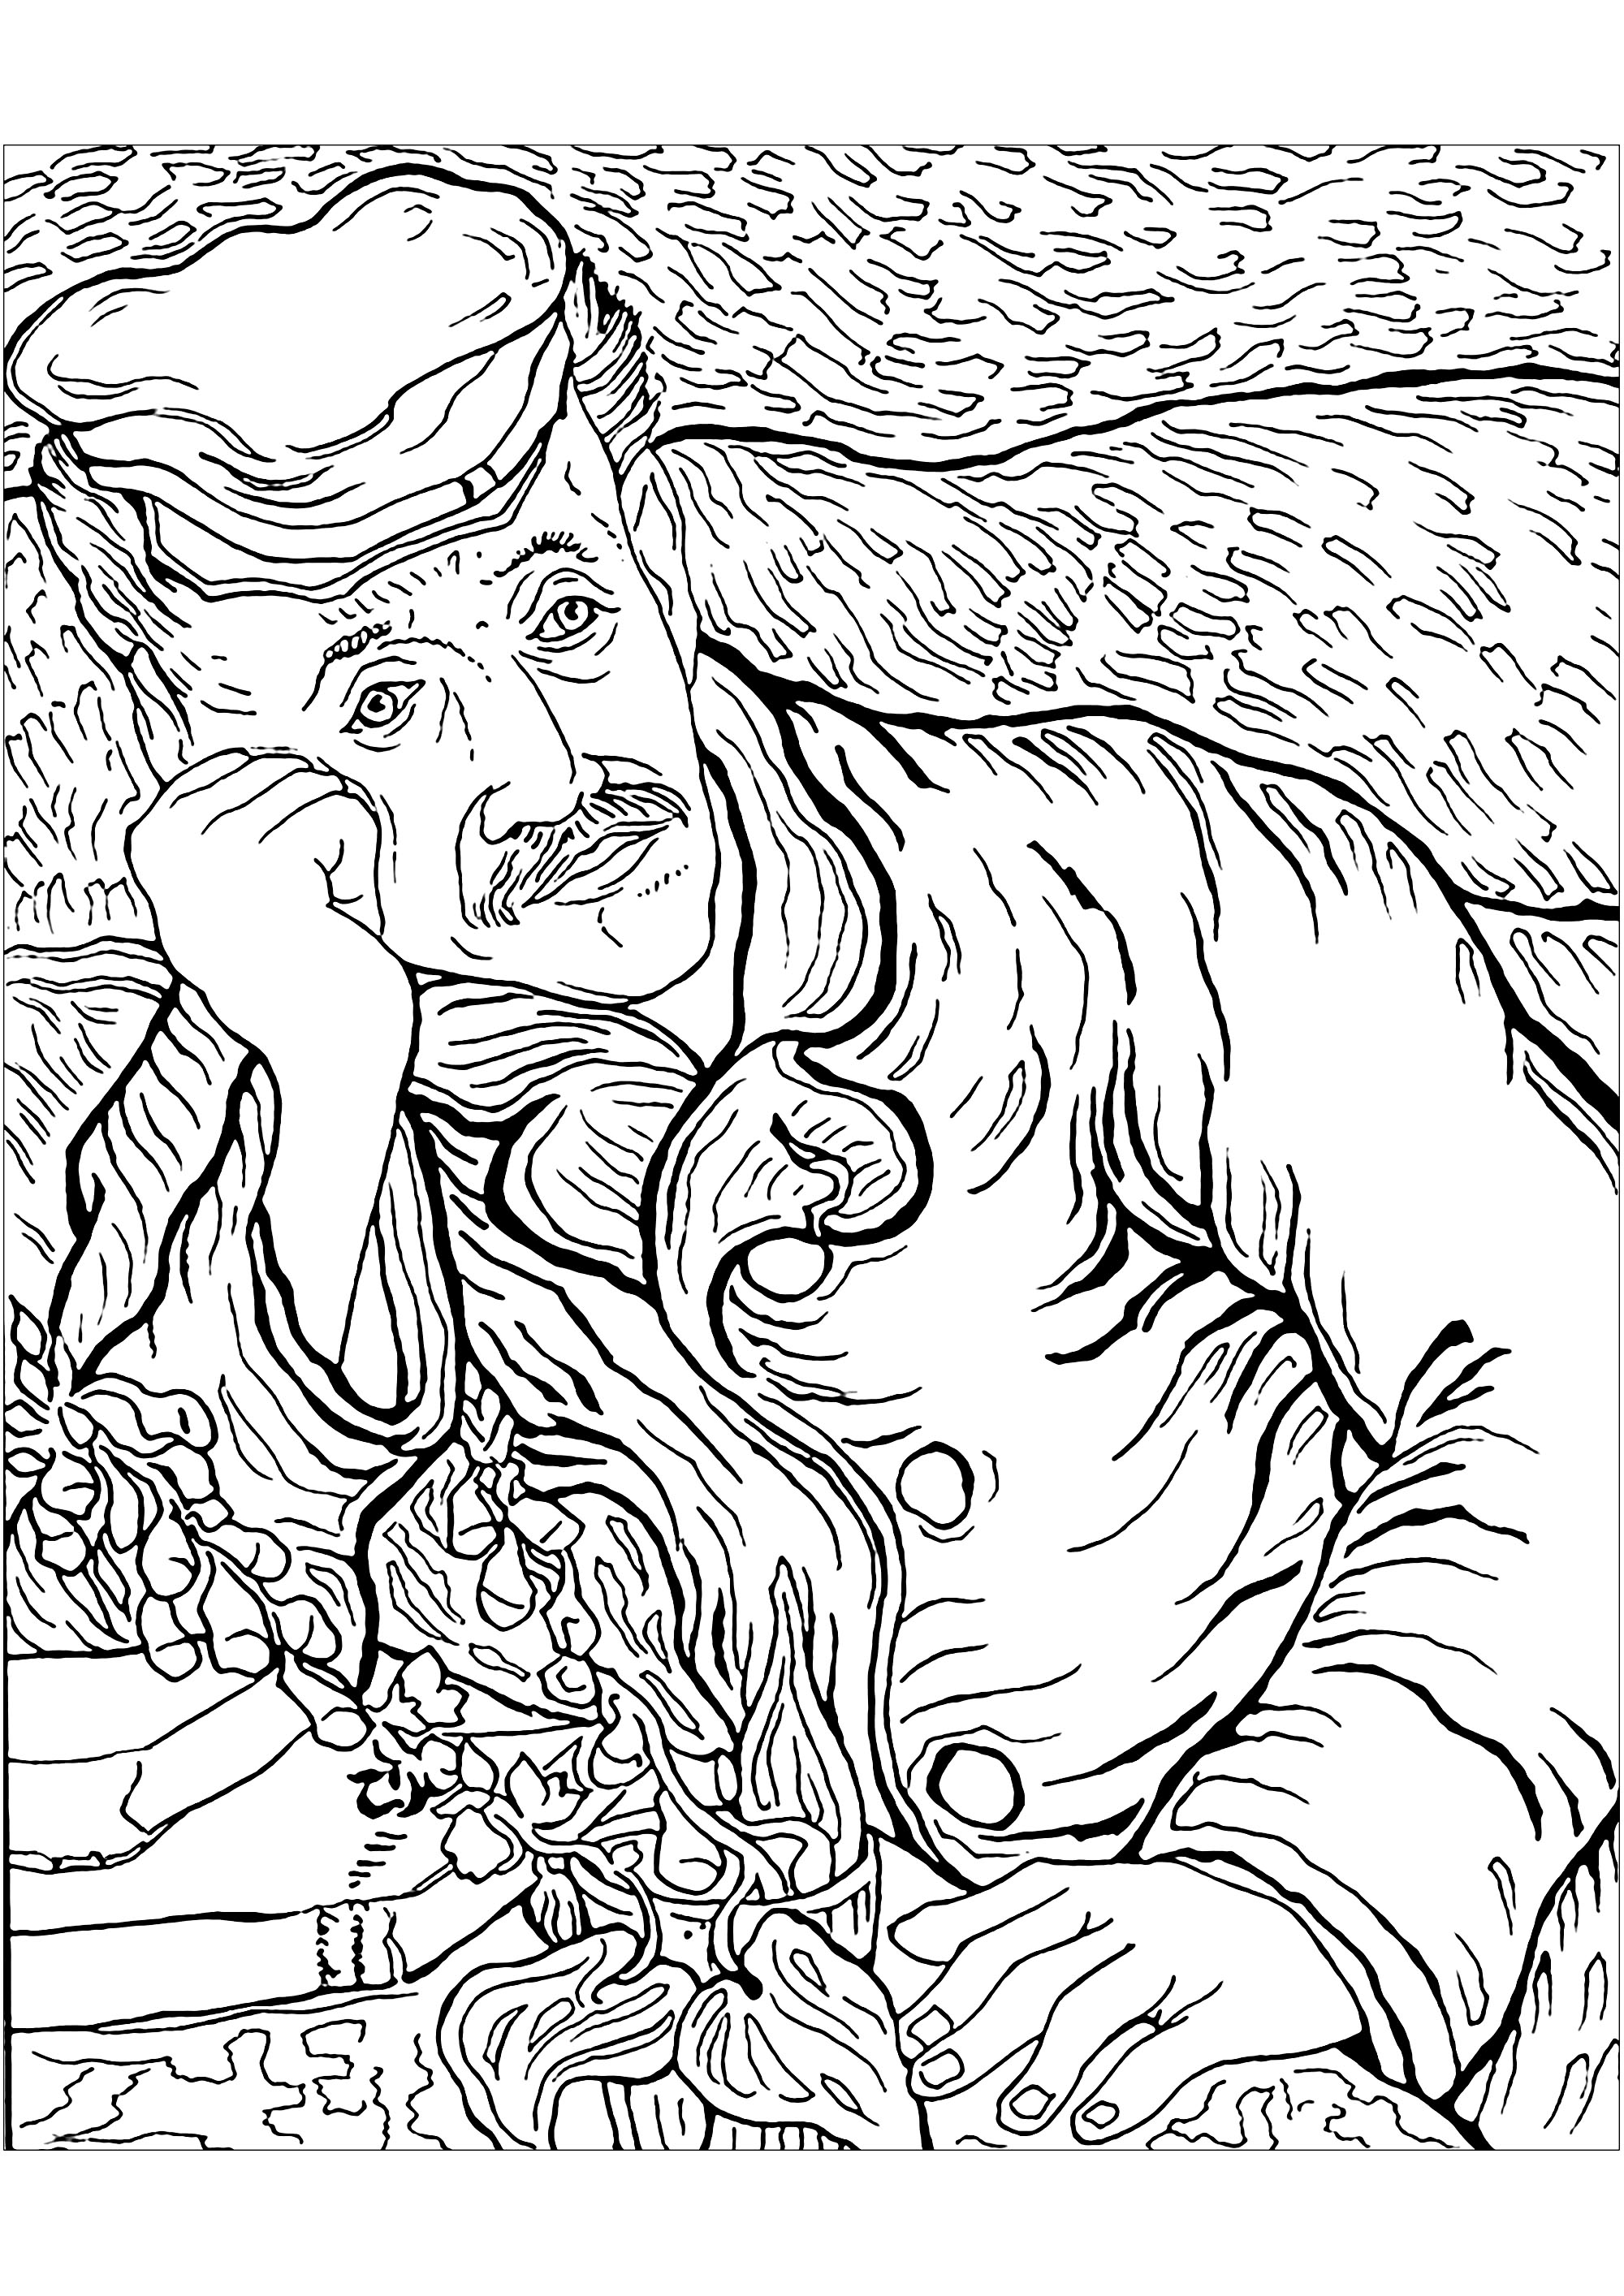 Coloring based on a painting by Vincent Van Gogh: Portrait du Docteur Gachet (1890). Dr. Gachet, a key figure in Vincent Van Gogh's last period in Auvers, was a homeopathic physician with a wide range of interests, including palmistry, and a great passion for the arts. He was an engraver and maintained relationships with renowned artists such as Manet, Monet, Renoir and Cézanne. After his internment at Saint-Rémy-de-Provence, Van Gogh, on the recommendation of his brother Theo, went to see psychiatric specialist Dr. Gachet. Dr. Gachet supported Vincent in his struggle against his anxieties, and offered him a favorable setting for artistic creation.Van Gogh painted a portrait of Dr. Gachet, reflecting a period of great creativity. The portrait shows the doctor in a melancholy posture, symbolizing the turmoil of the time. However, a note of hope is provided by the foxglove flower, known for its healing properties. Despite Dr. Gachet's help, van Gogh eventually succumbed to his inner demons and took his own life, Artist : Art. Isabelle